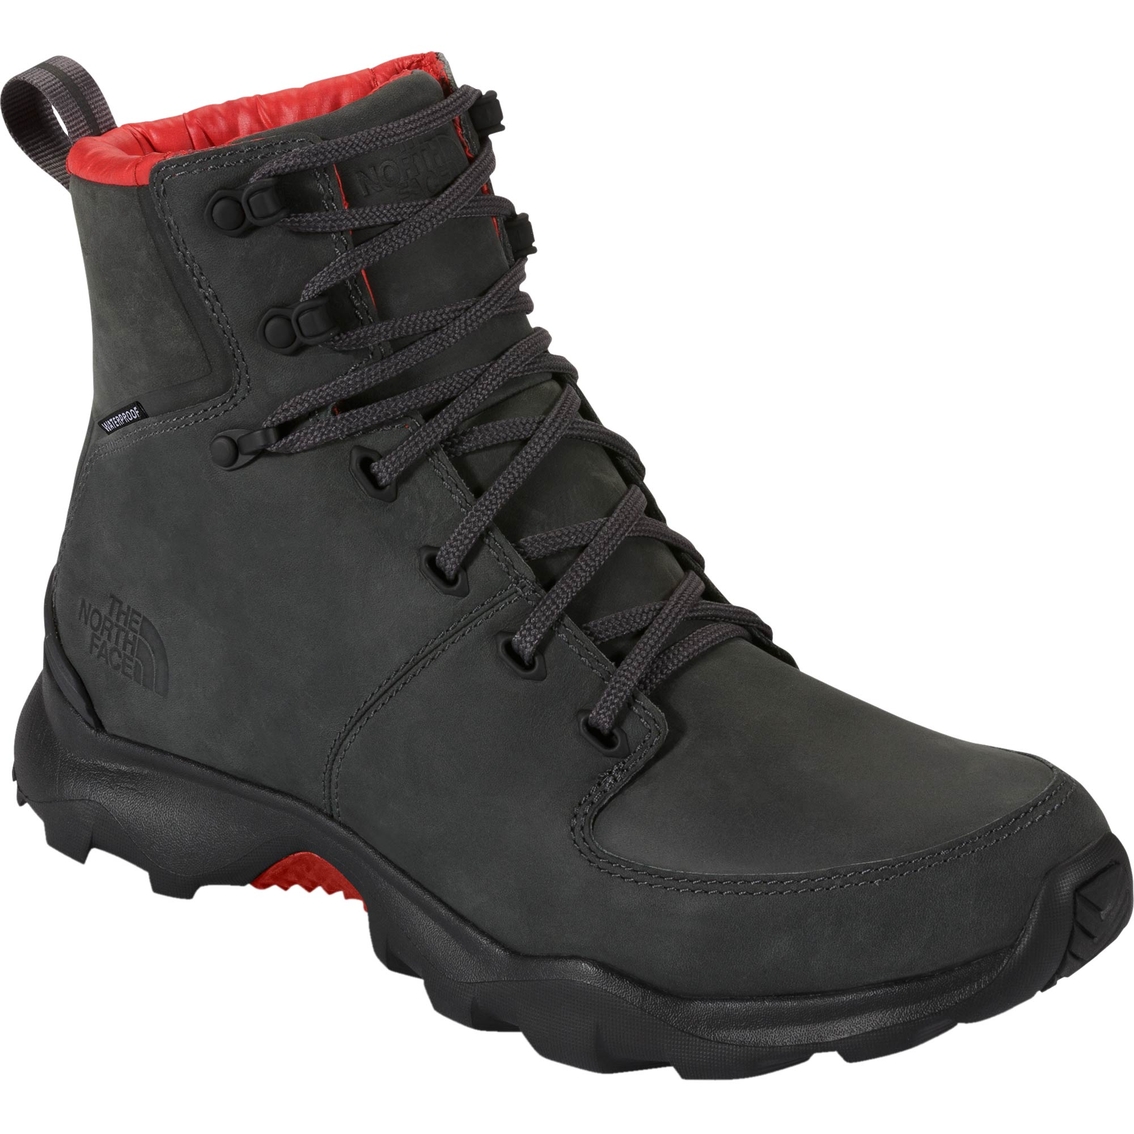 north face insulated shoes